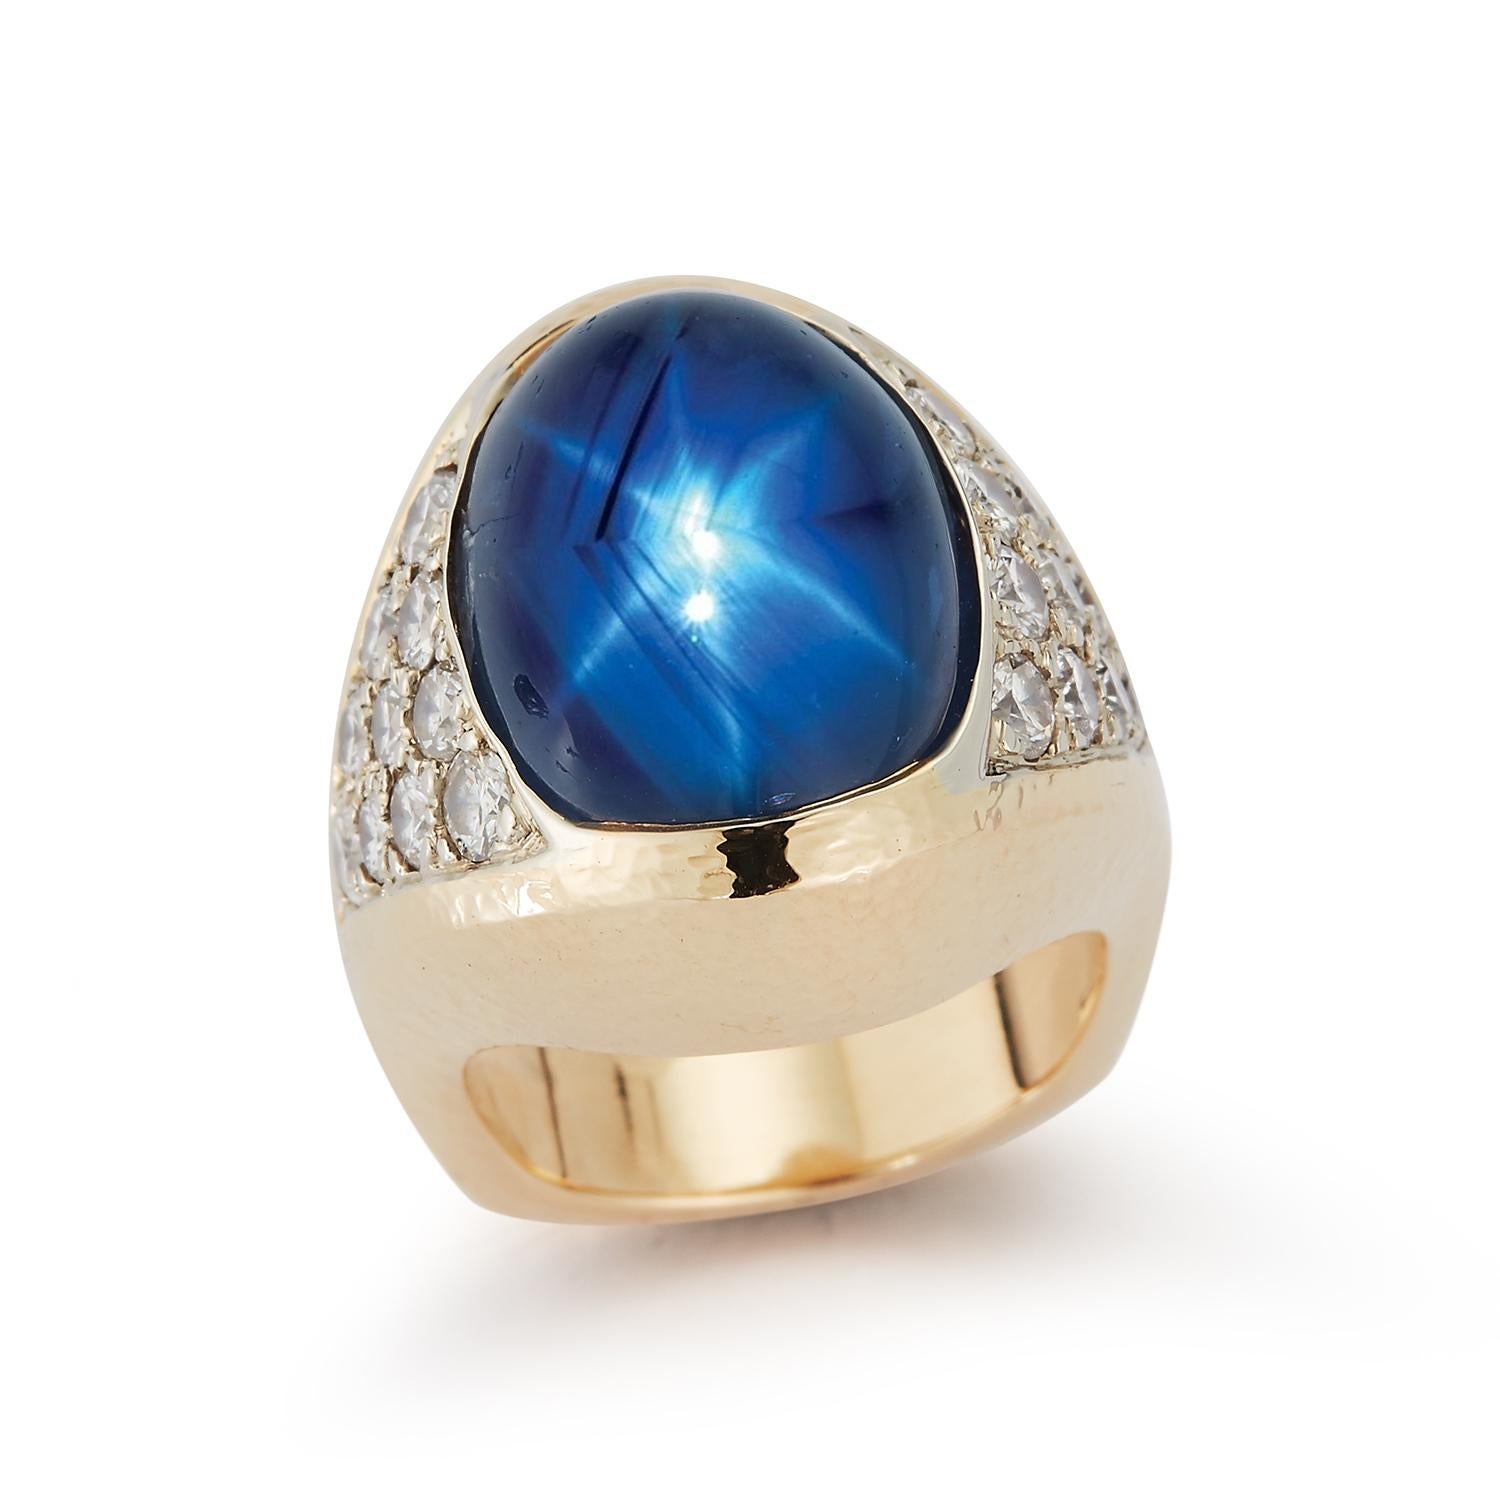 Certified Natural Star Sapphire Men's Ring by David Webb
Ring Size: 5
Resizable
The Sapphire is certified by AGL laboratory as being natural with no treatment whatsoever and of Ceylon origin
Signed David Webb
Very early David Webb
Gold Type: